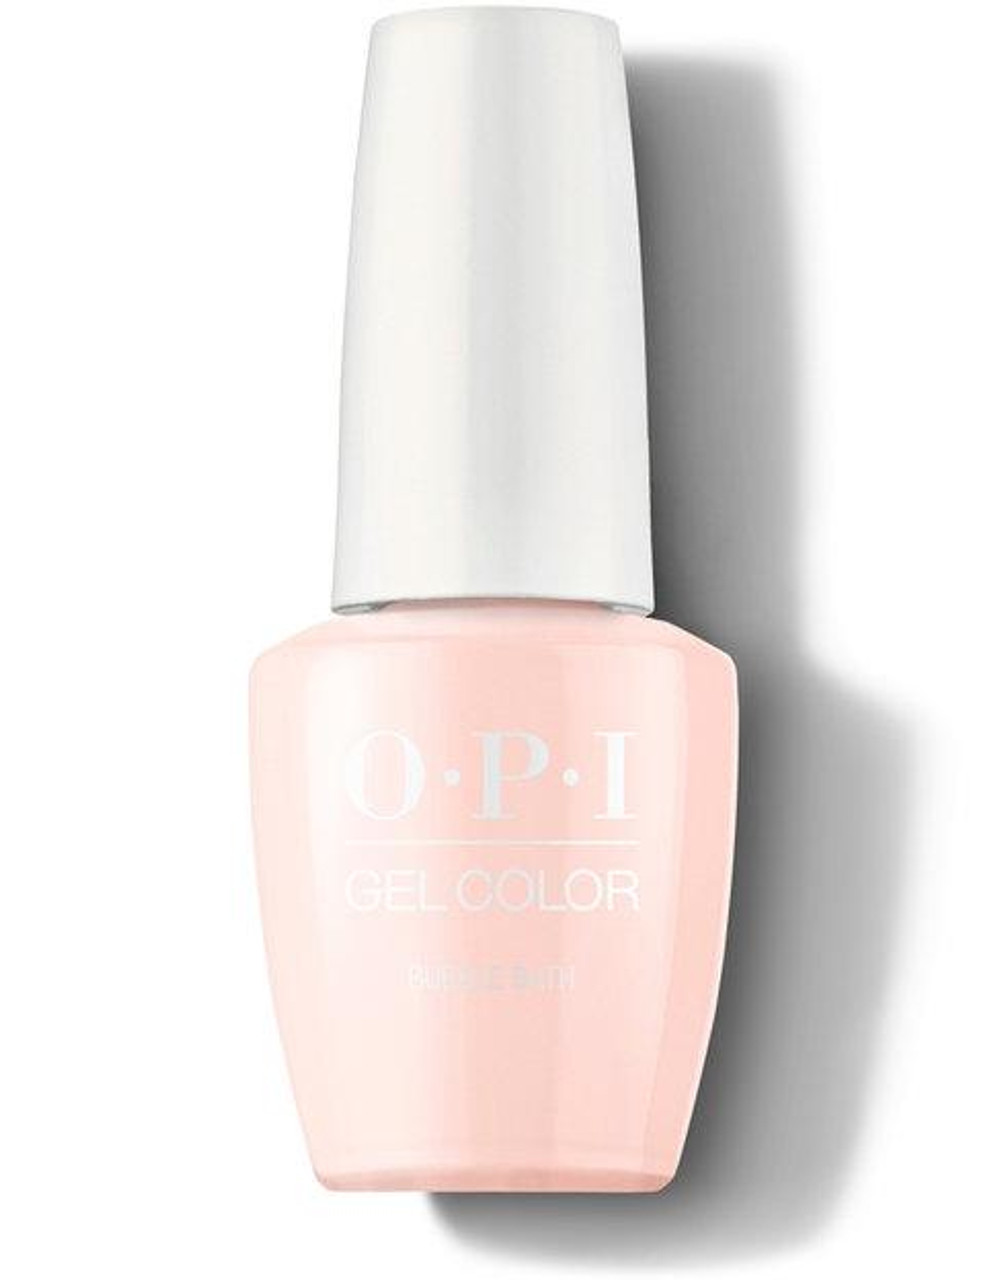 If You Love The OPI Nail Color Bubble Bath Give This Neutral Color A Try